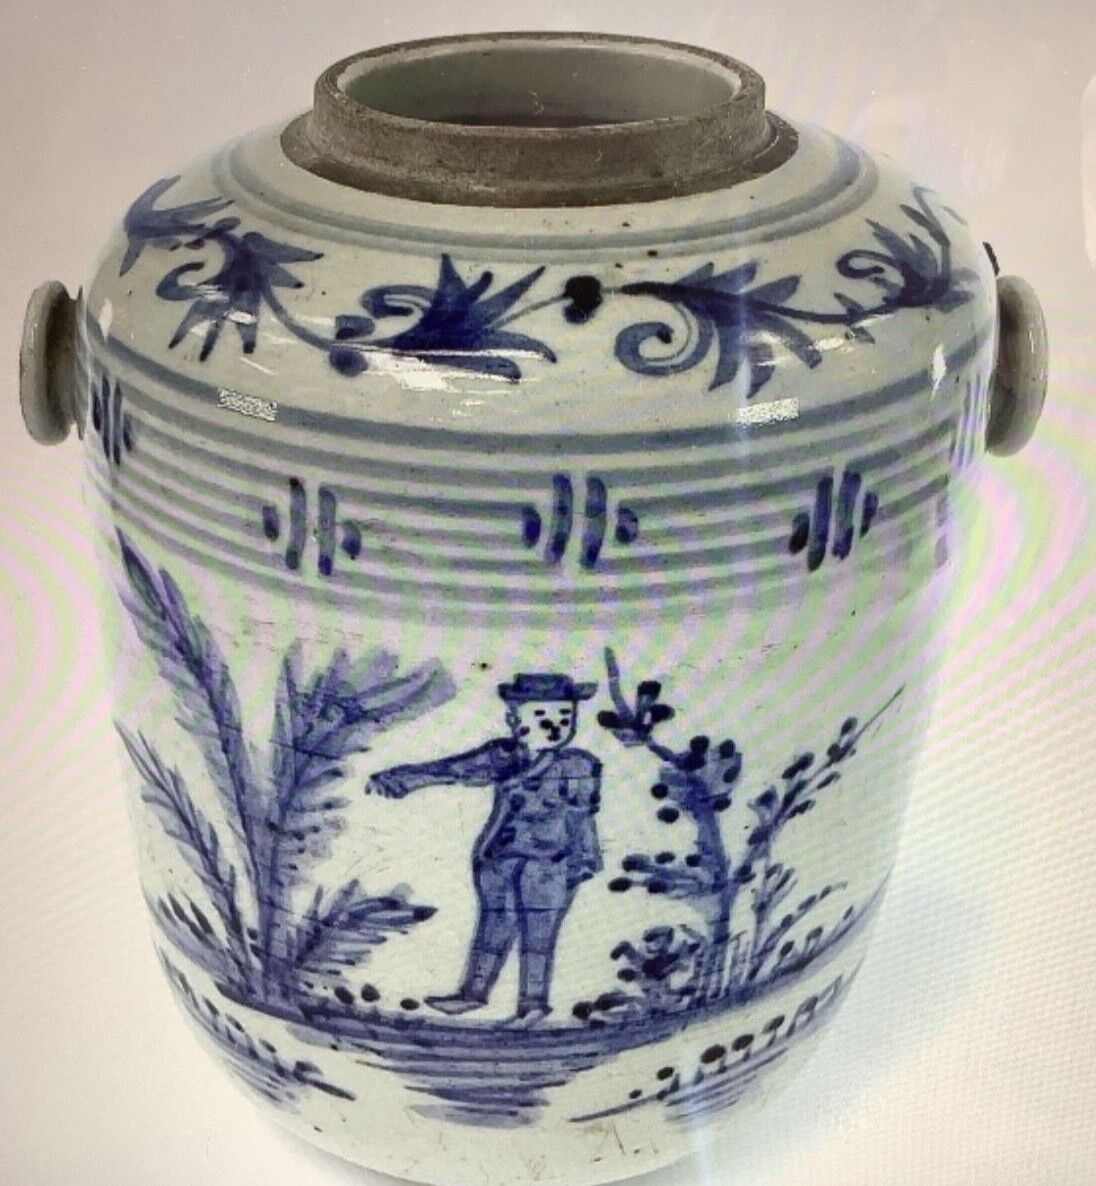 Antique Valuations: A Chinese blue and white porcelain early 19th century pail.